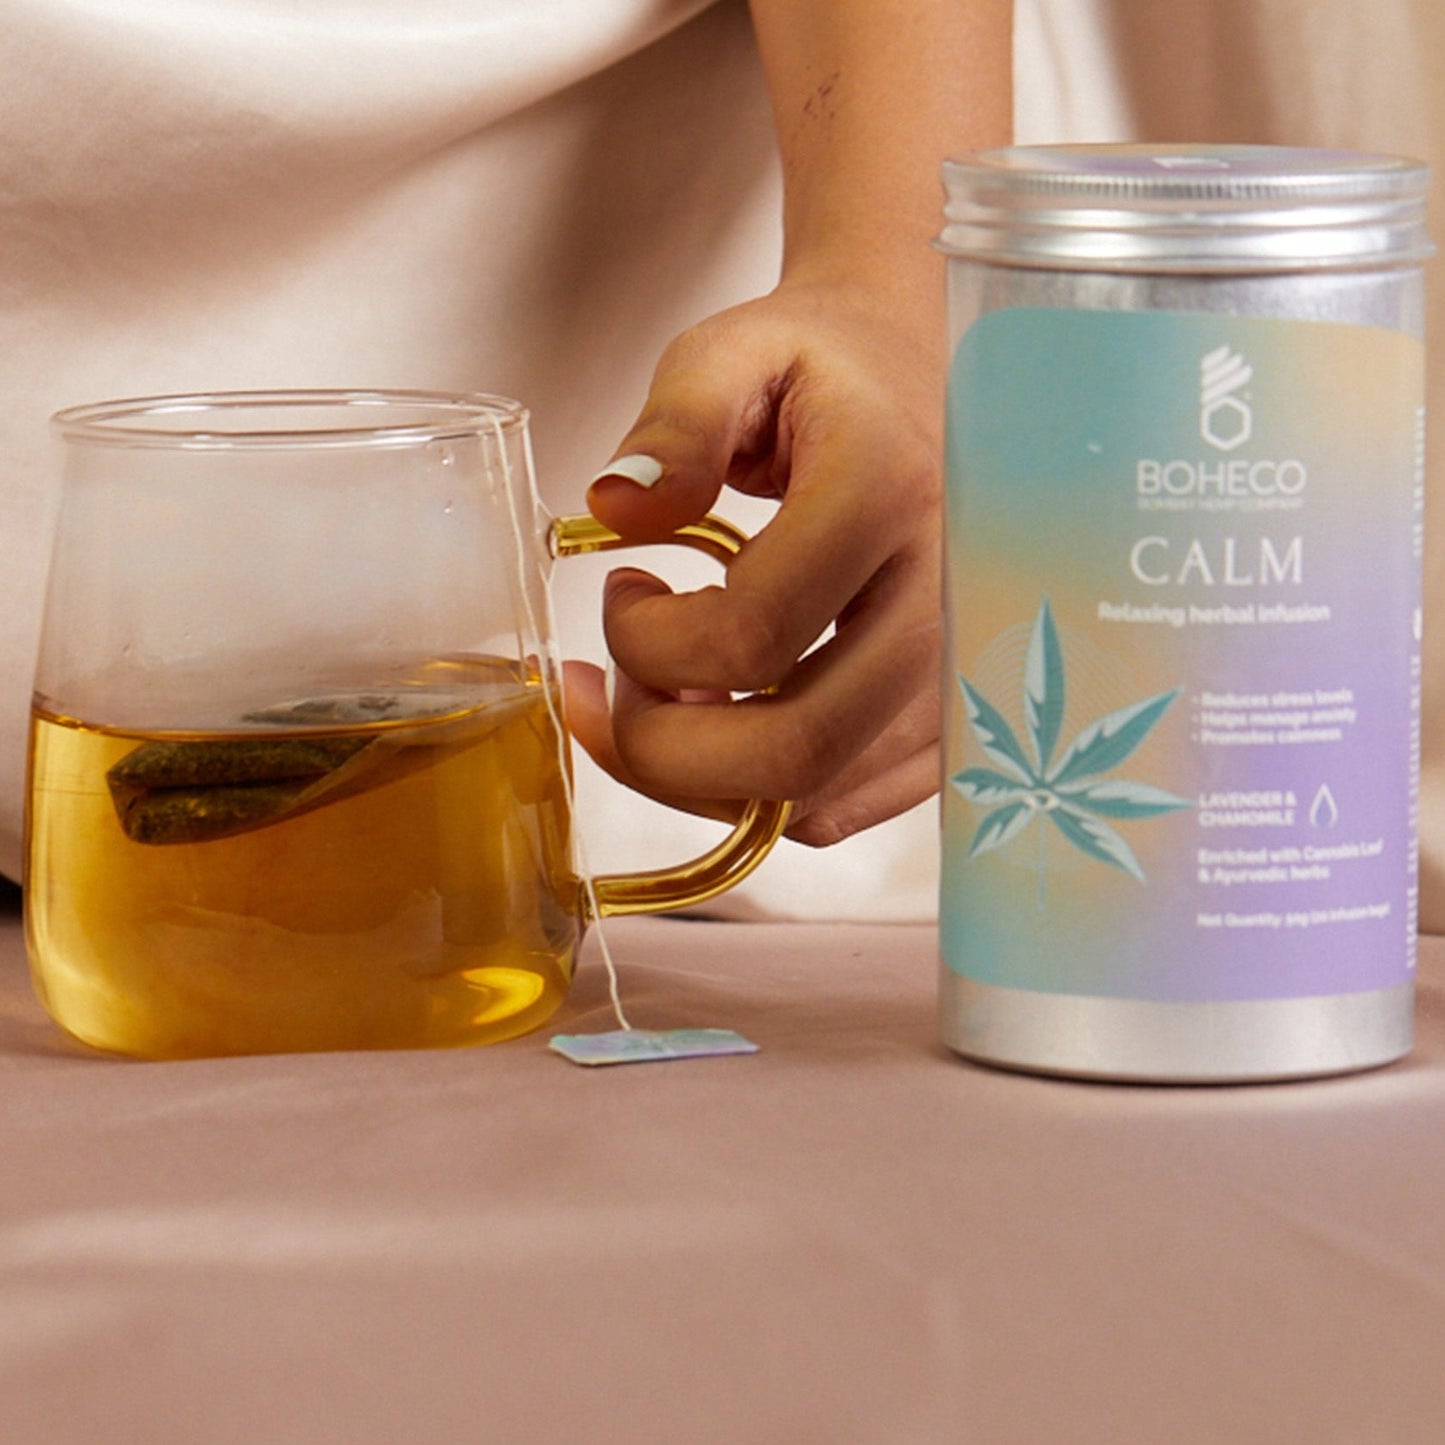 Boheco - Calm - Relaxing Herbal Infusion Bags